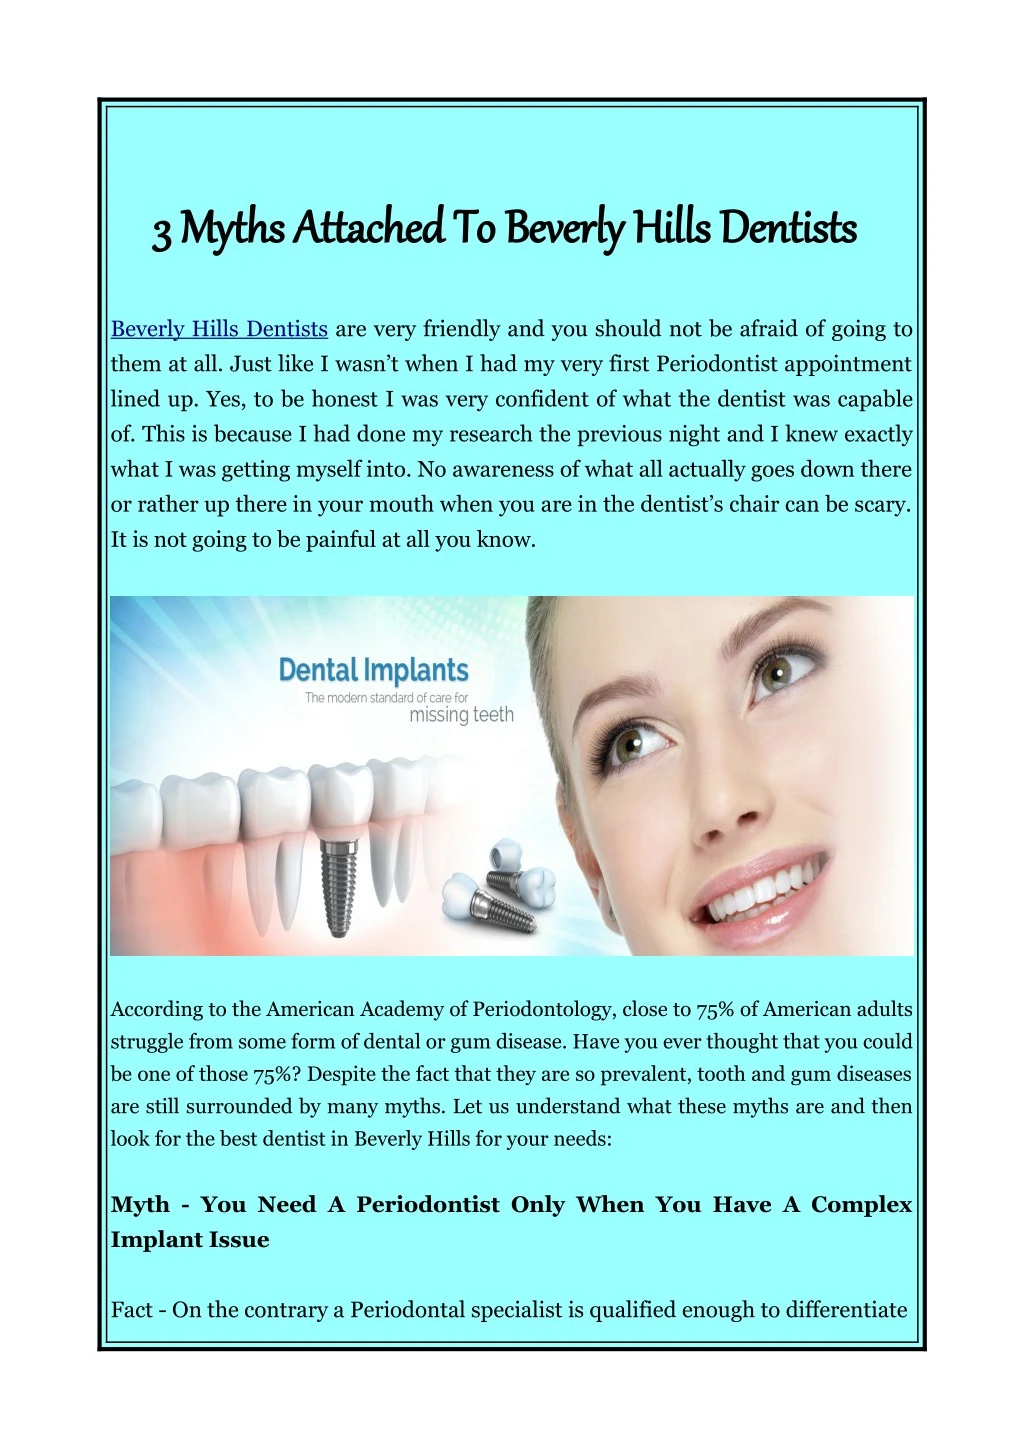 3 myths attached to beverly hills dentists